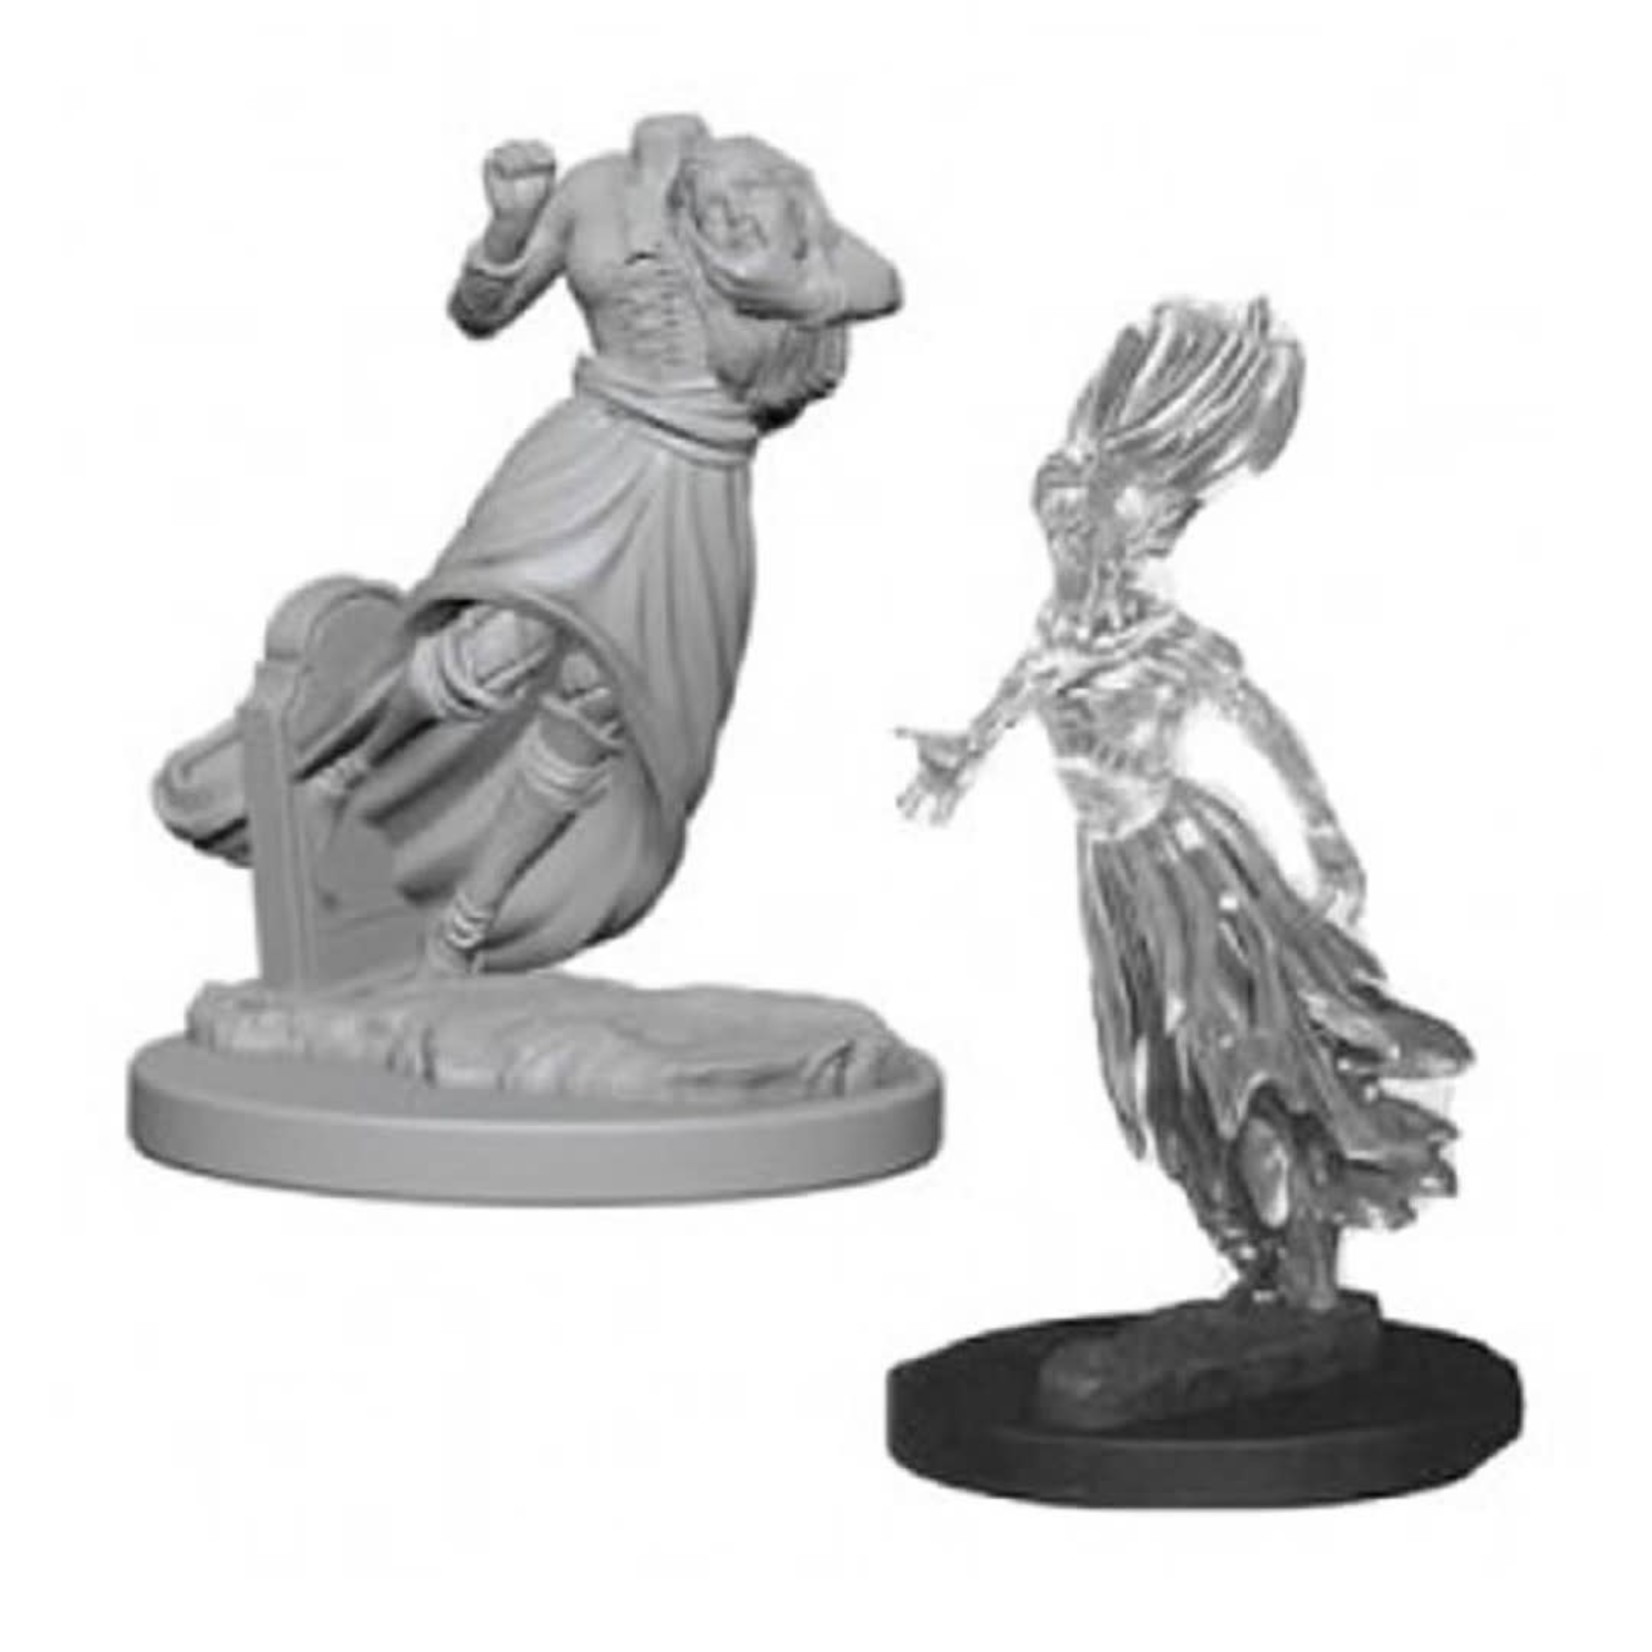 WizKids Dungeons and Dragons Nolzur's Marvelous Minis Ghost and Banshee